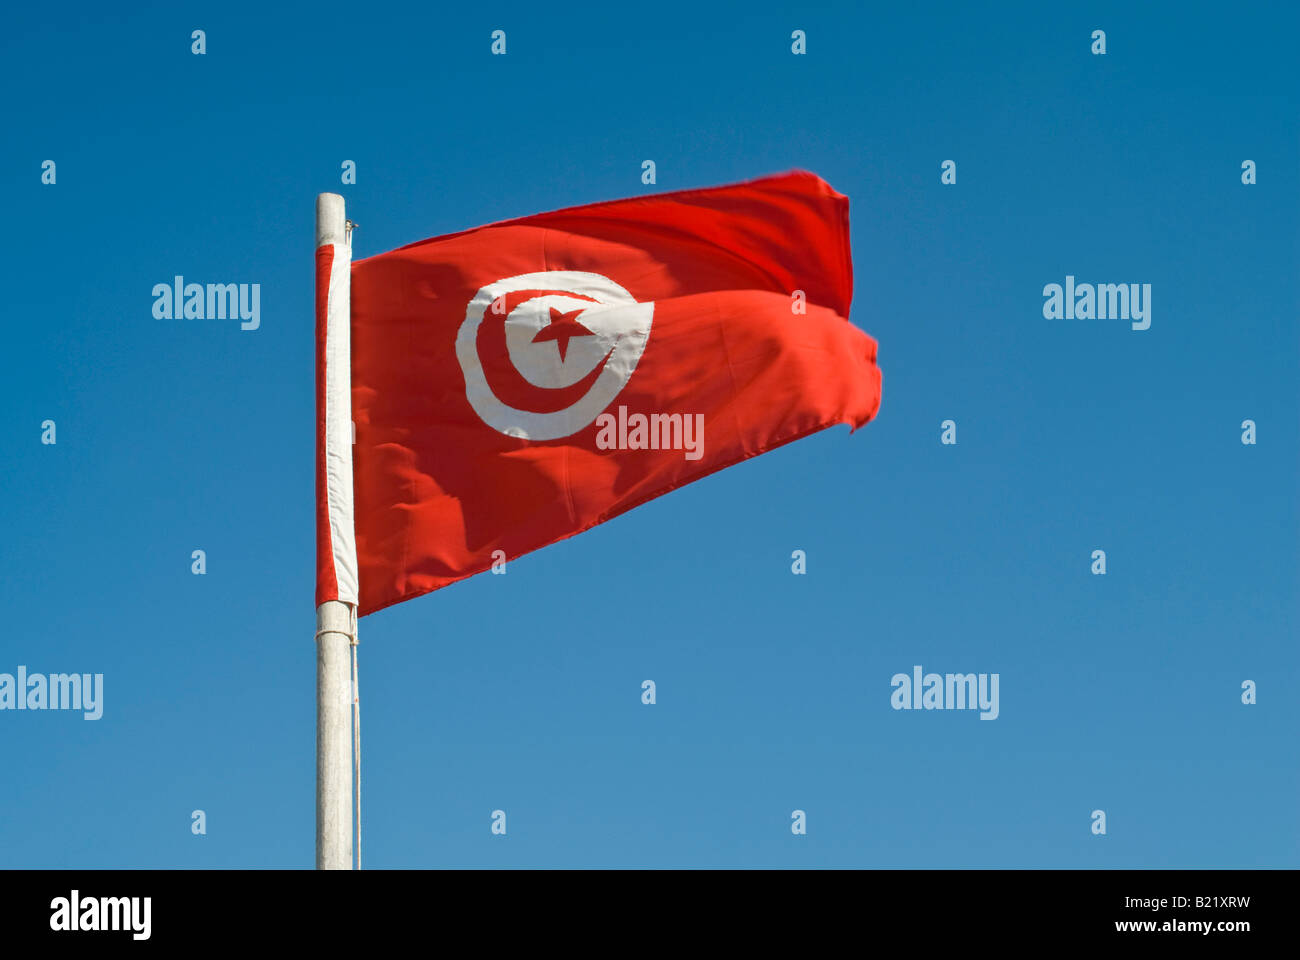 Horizontal close up of the 'post 1999' Tunisian flag with red crescent and star against a blue sky Stock Photo